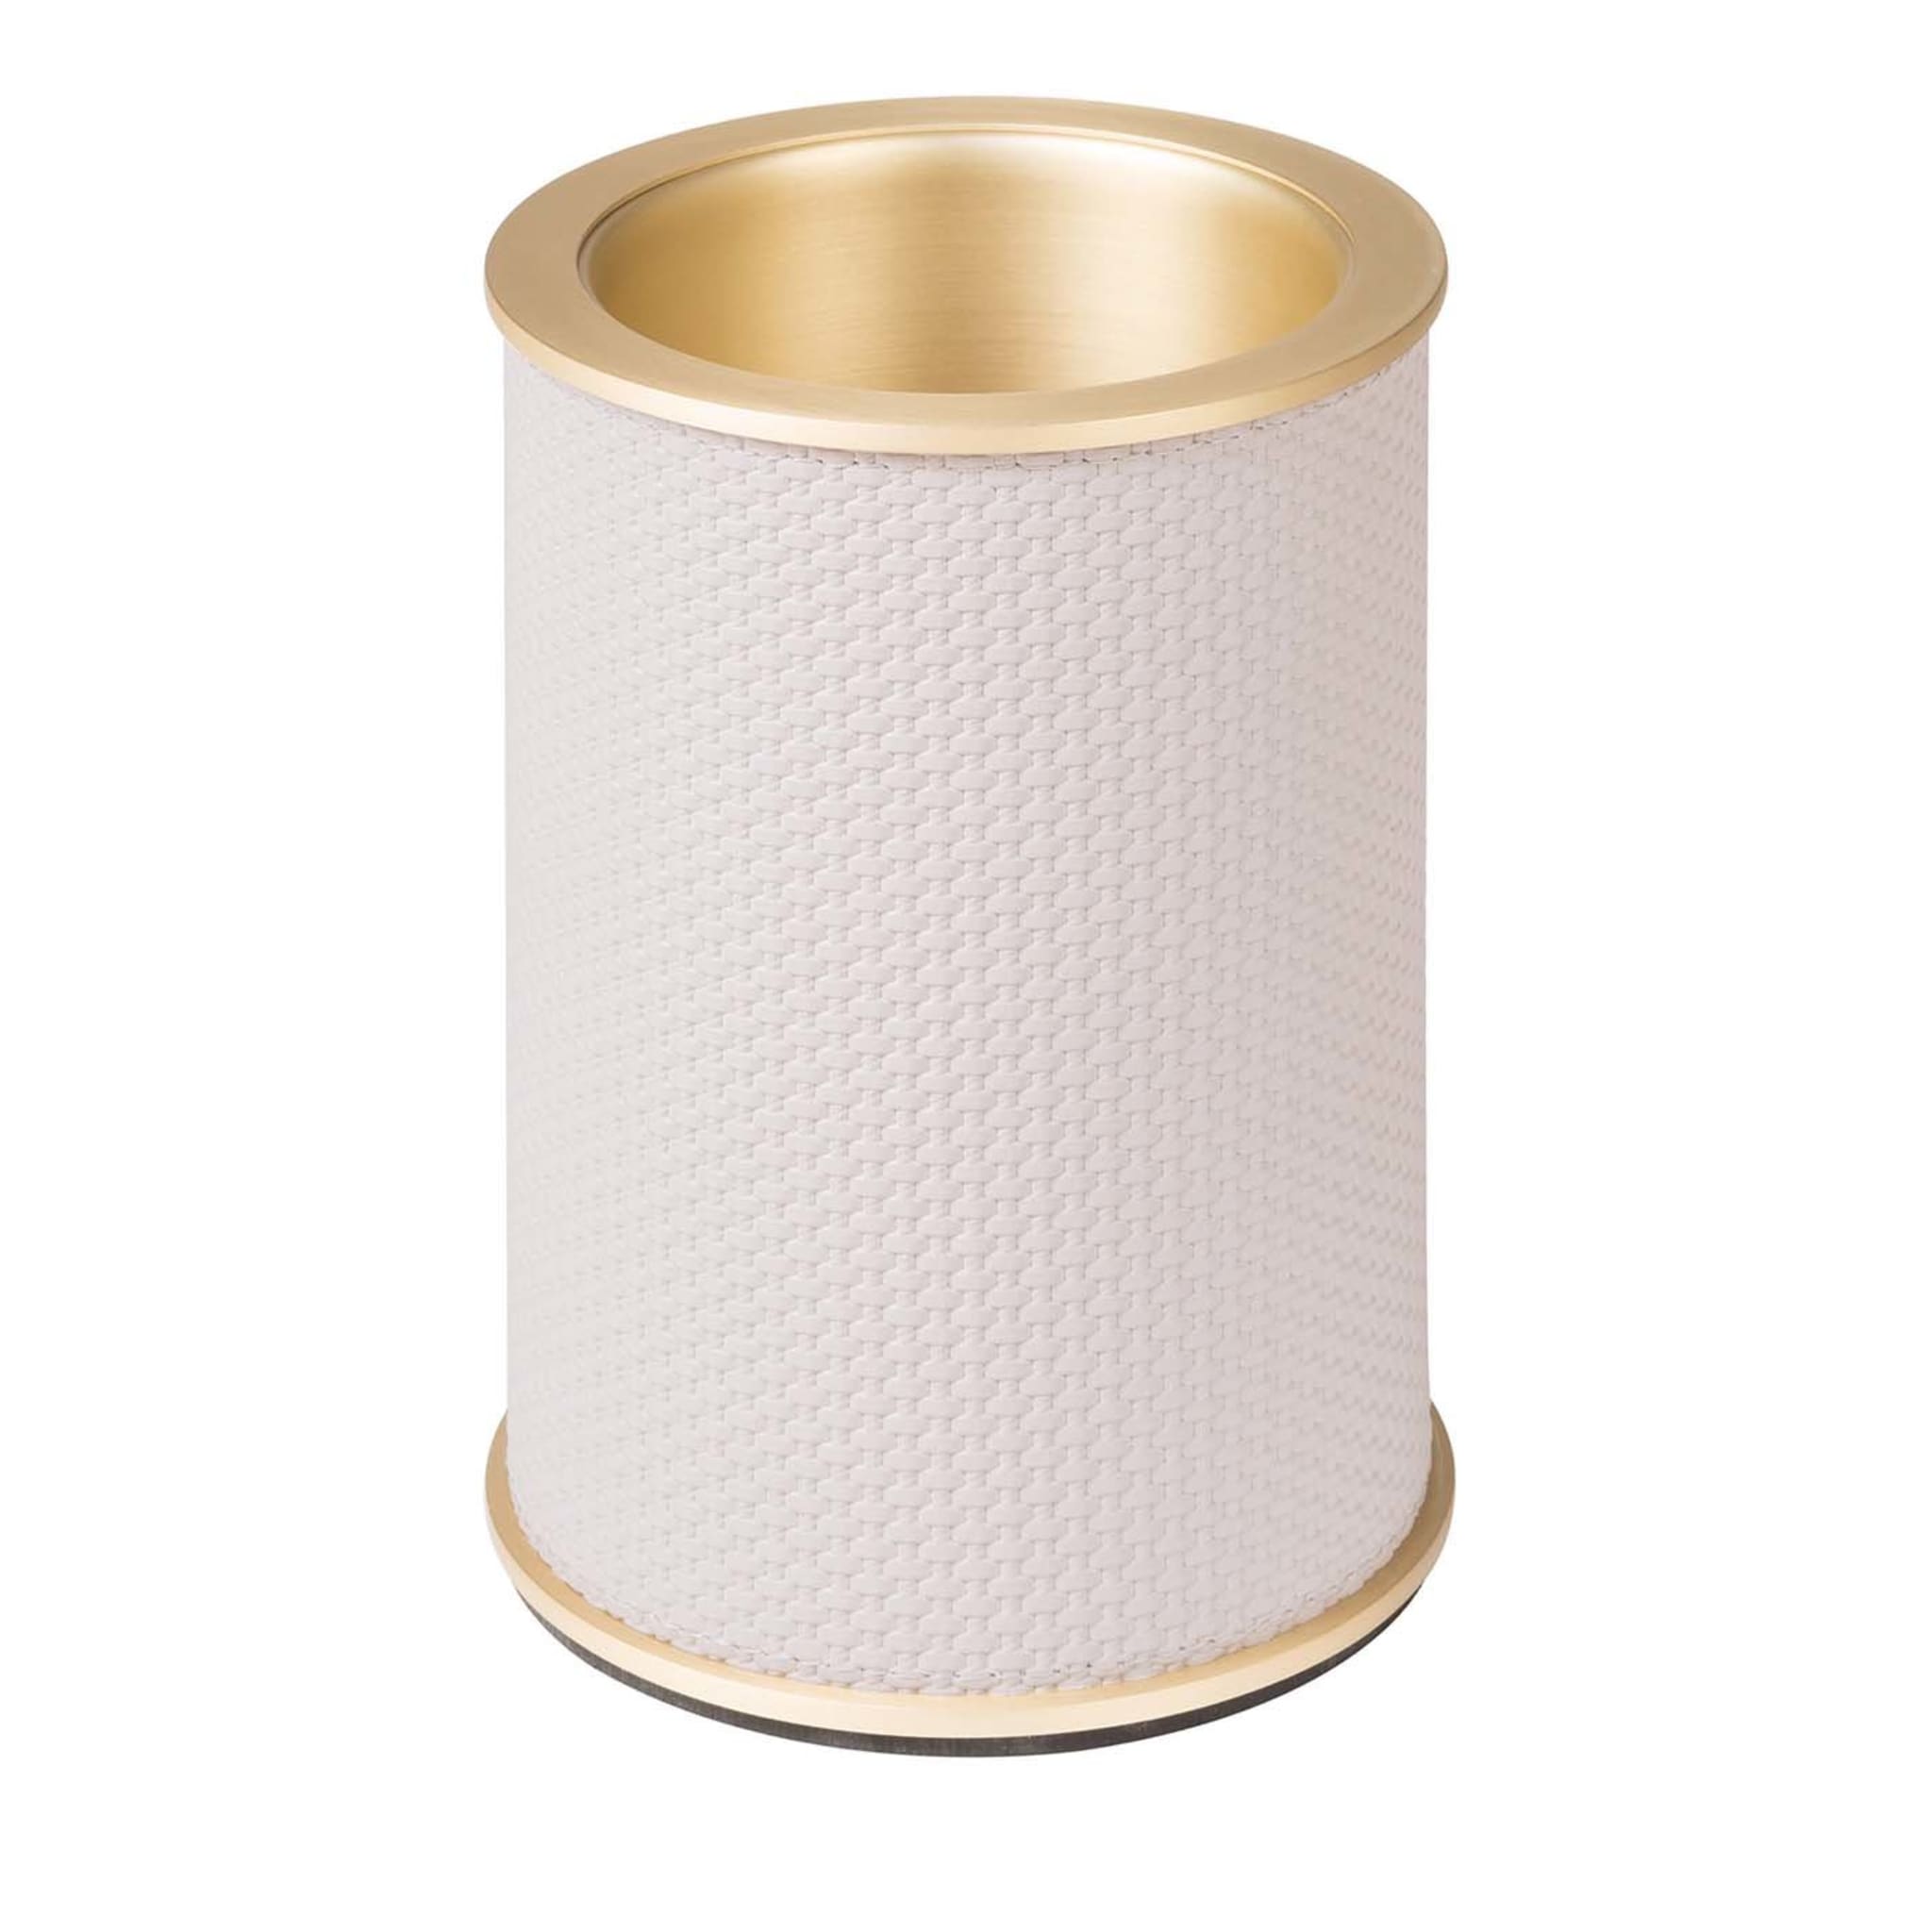 Positano White and Gold Bottle Cooler - Main view